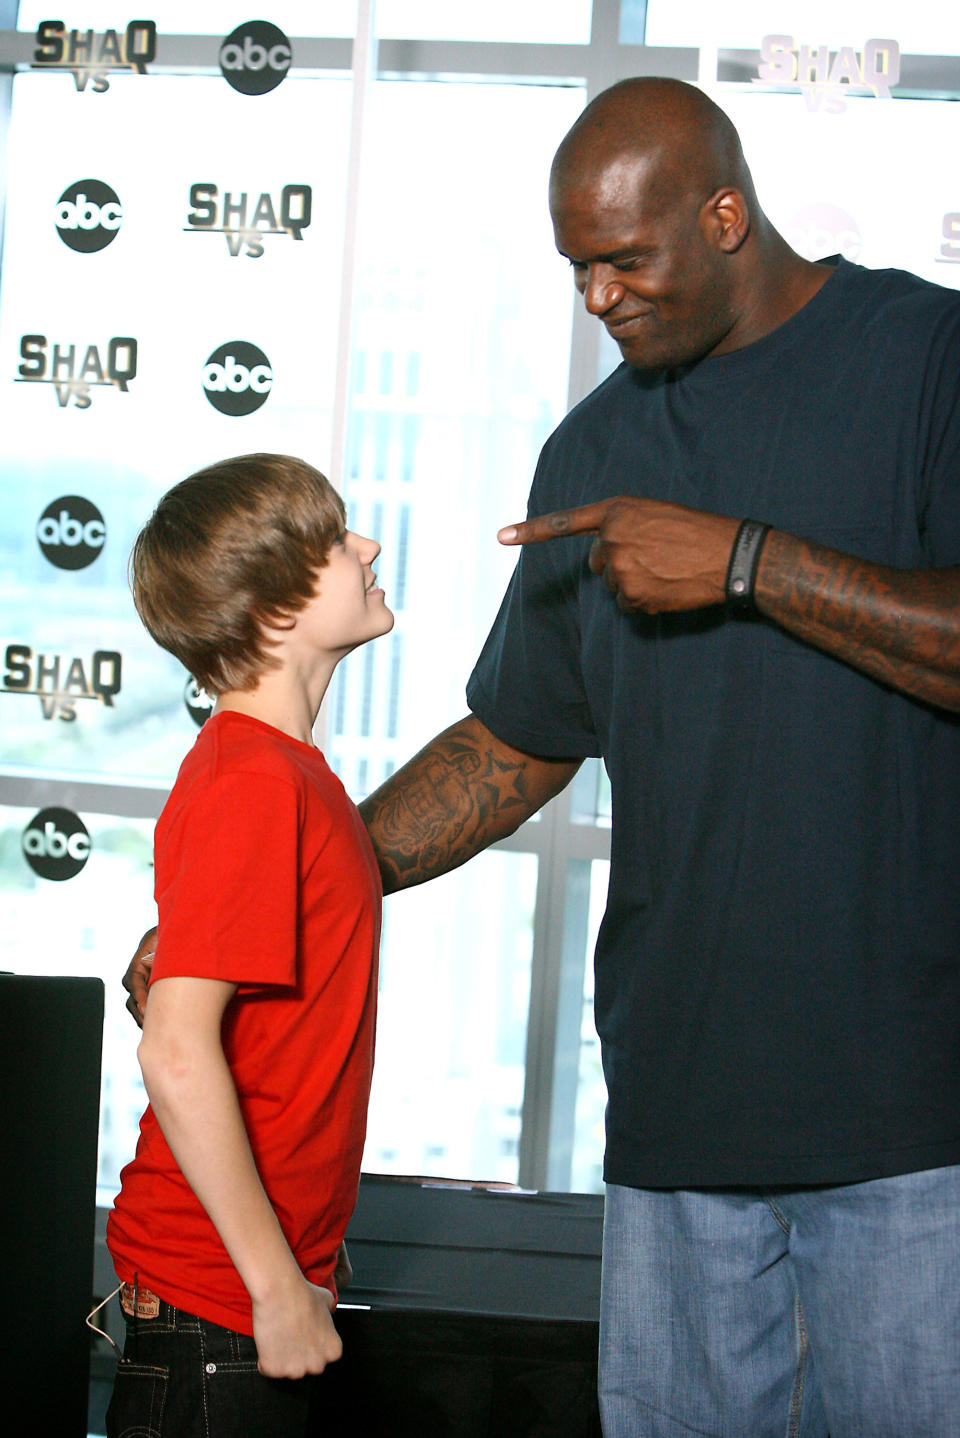 Justin Bieber and Shaquille O’Neal (Photo: Jacob Langston/Orlando Sentinel/MCT)